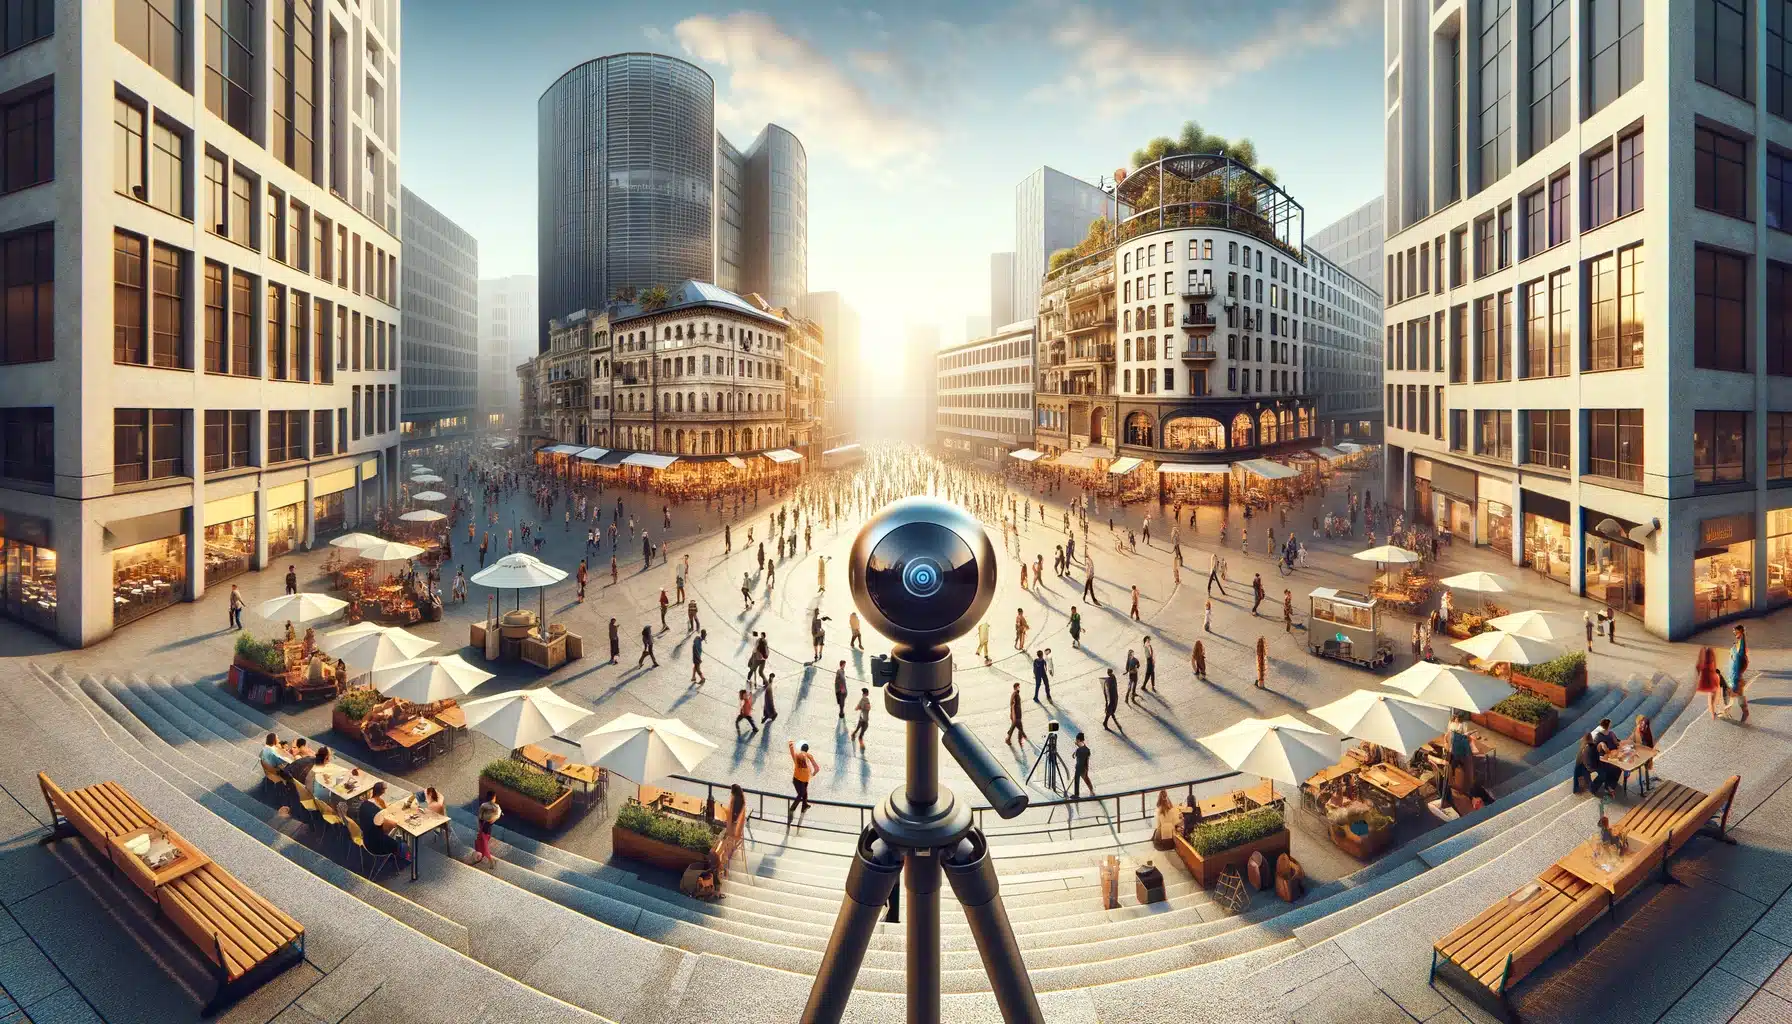 In a busy city square, a All-around image camera on a tripod captures the dynamic urban environment, with people, street performers, and a blend of modern and historical buildings.